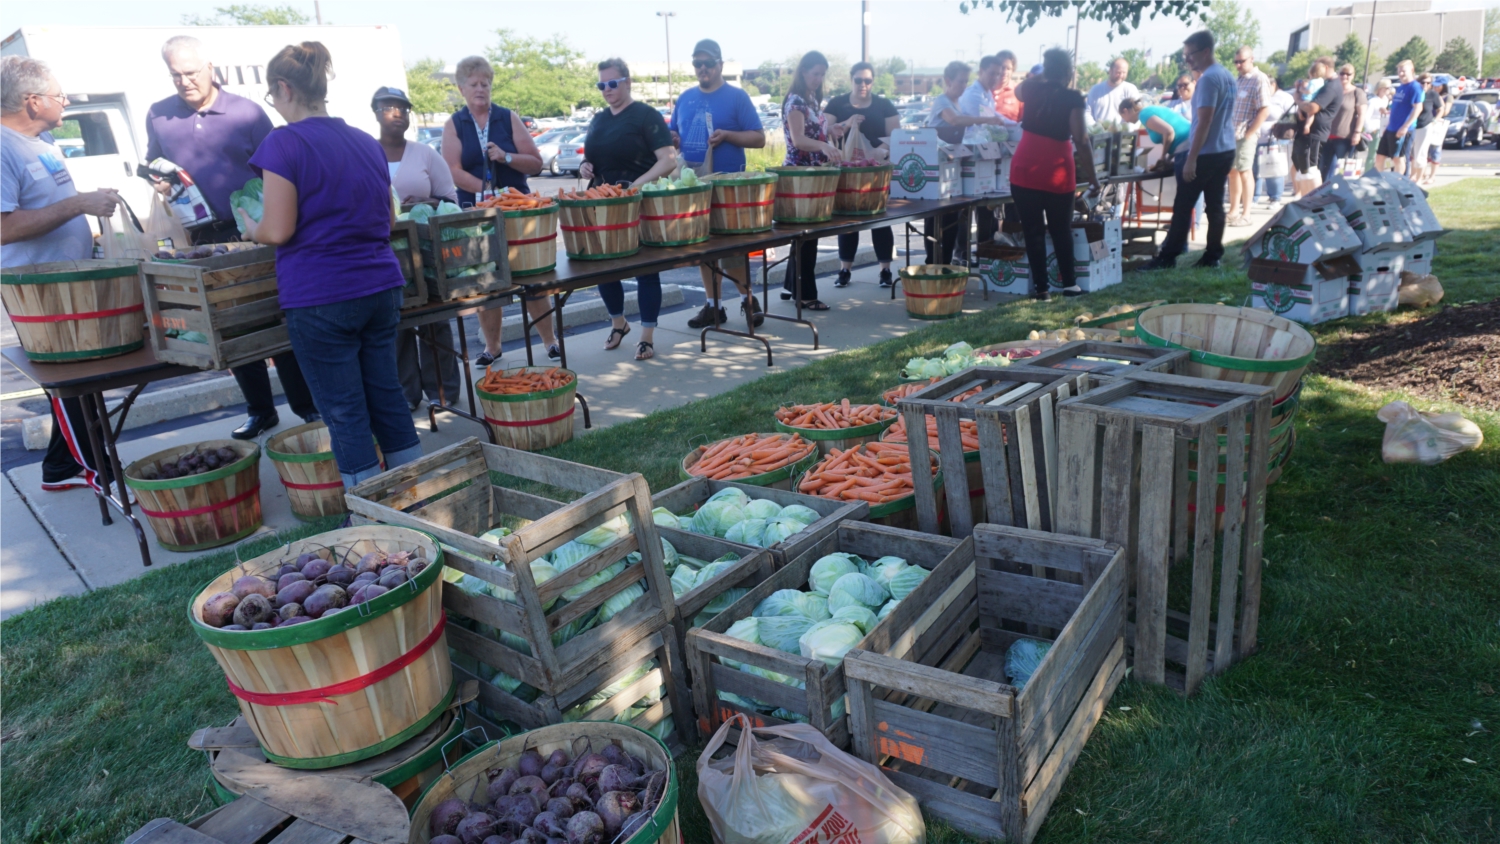 Team members and their families enjoyed the annual outdoor farmer's market on campus